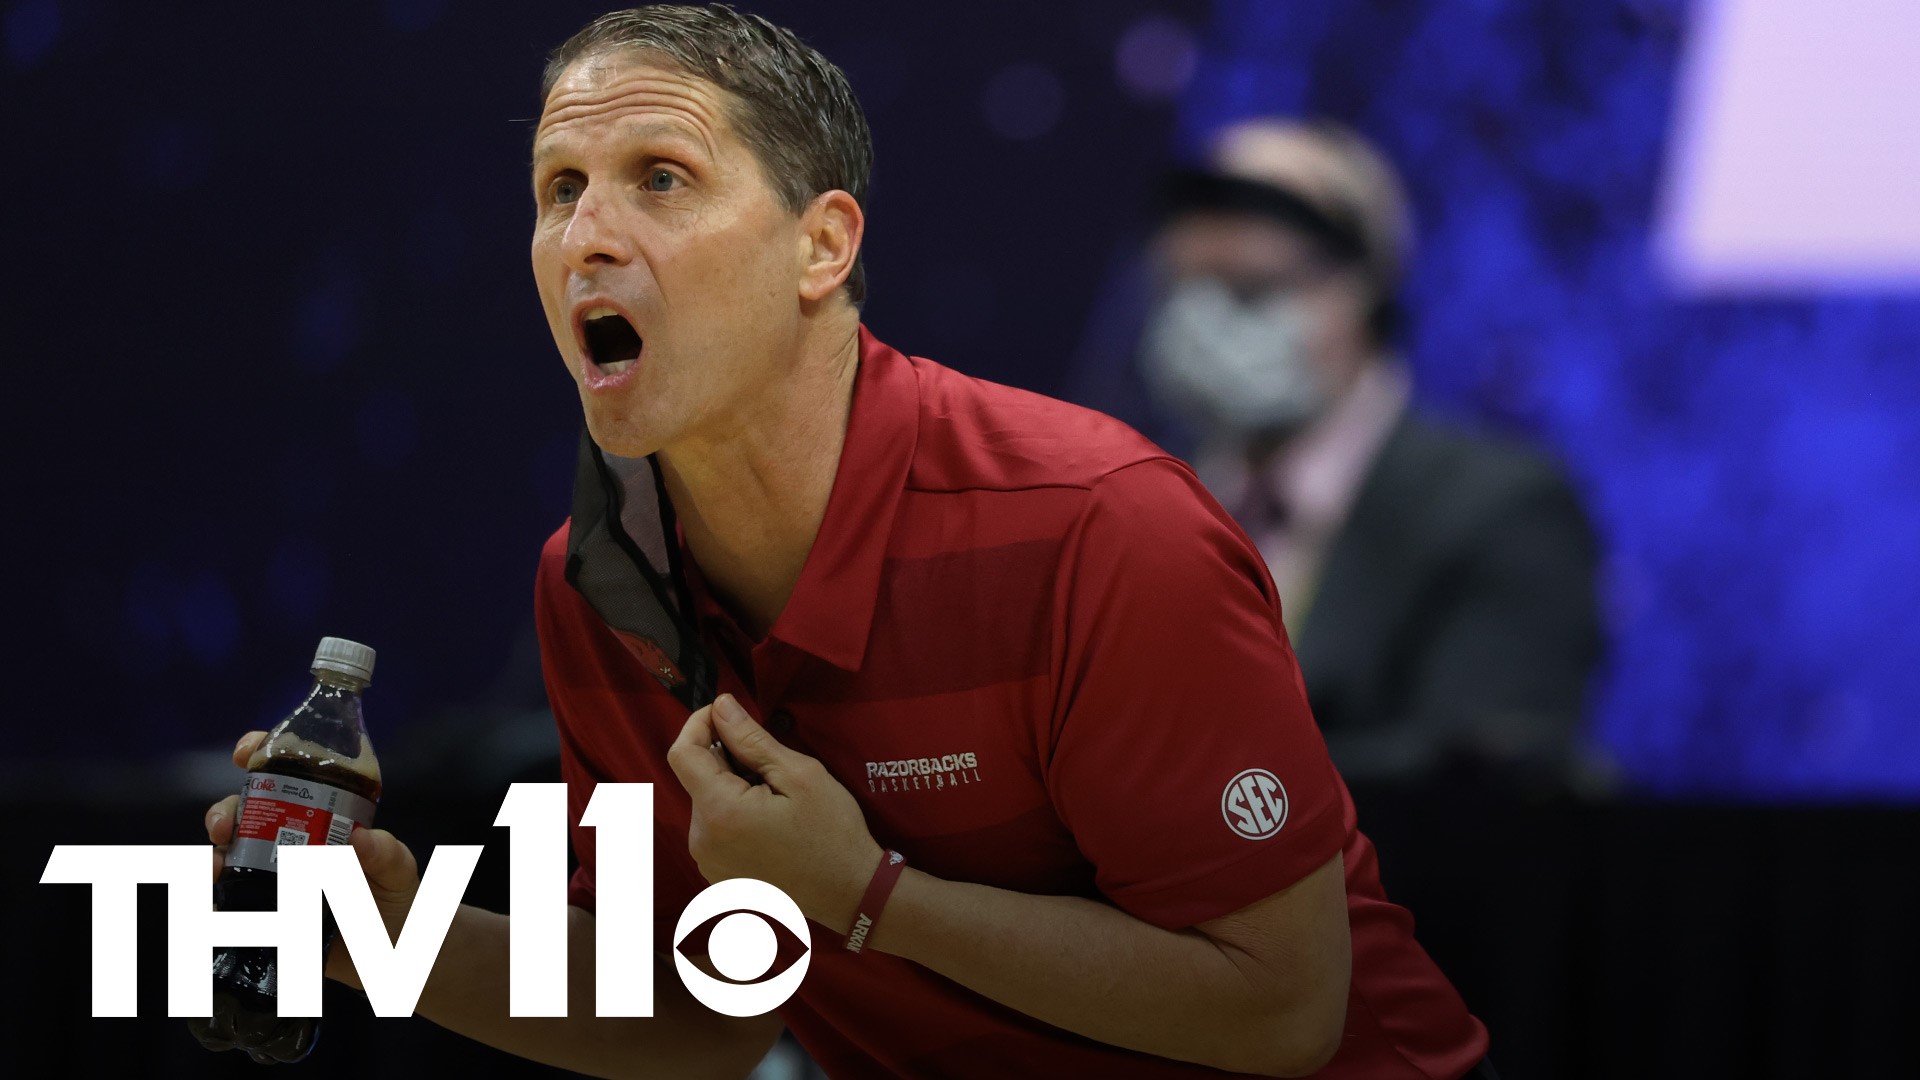 Eric Musselman recaps the Elite 8 loss to Baylor and what's next for the Arkansas Razorbacks.